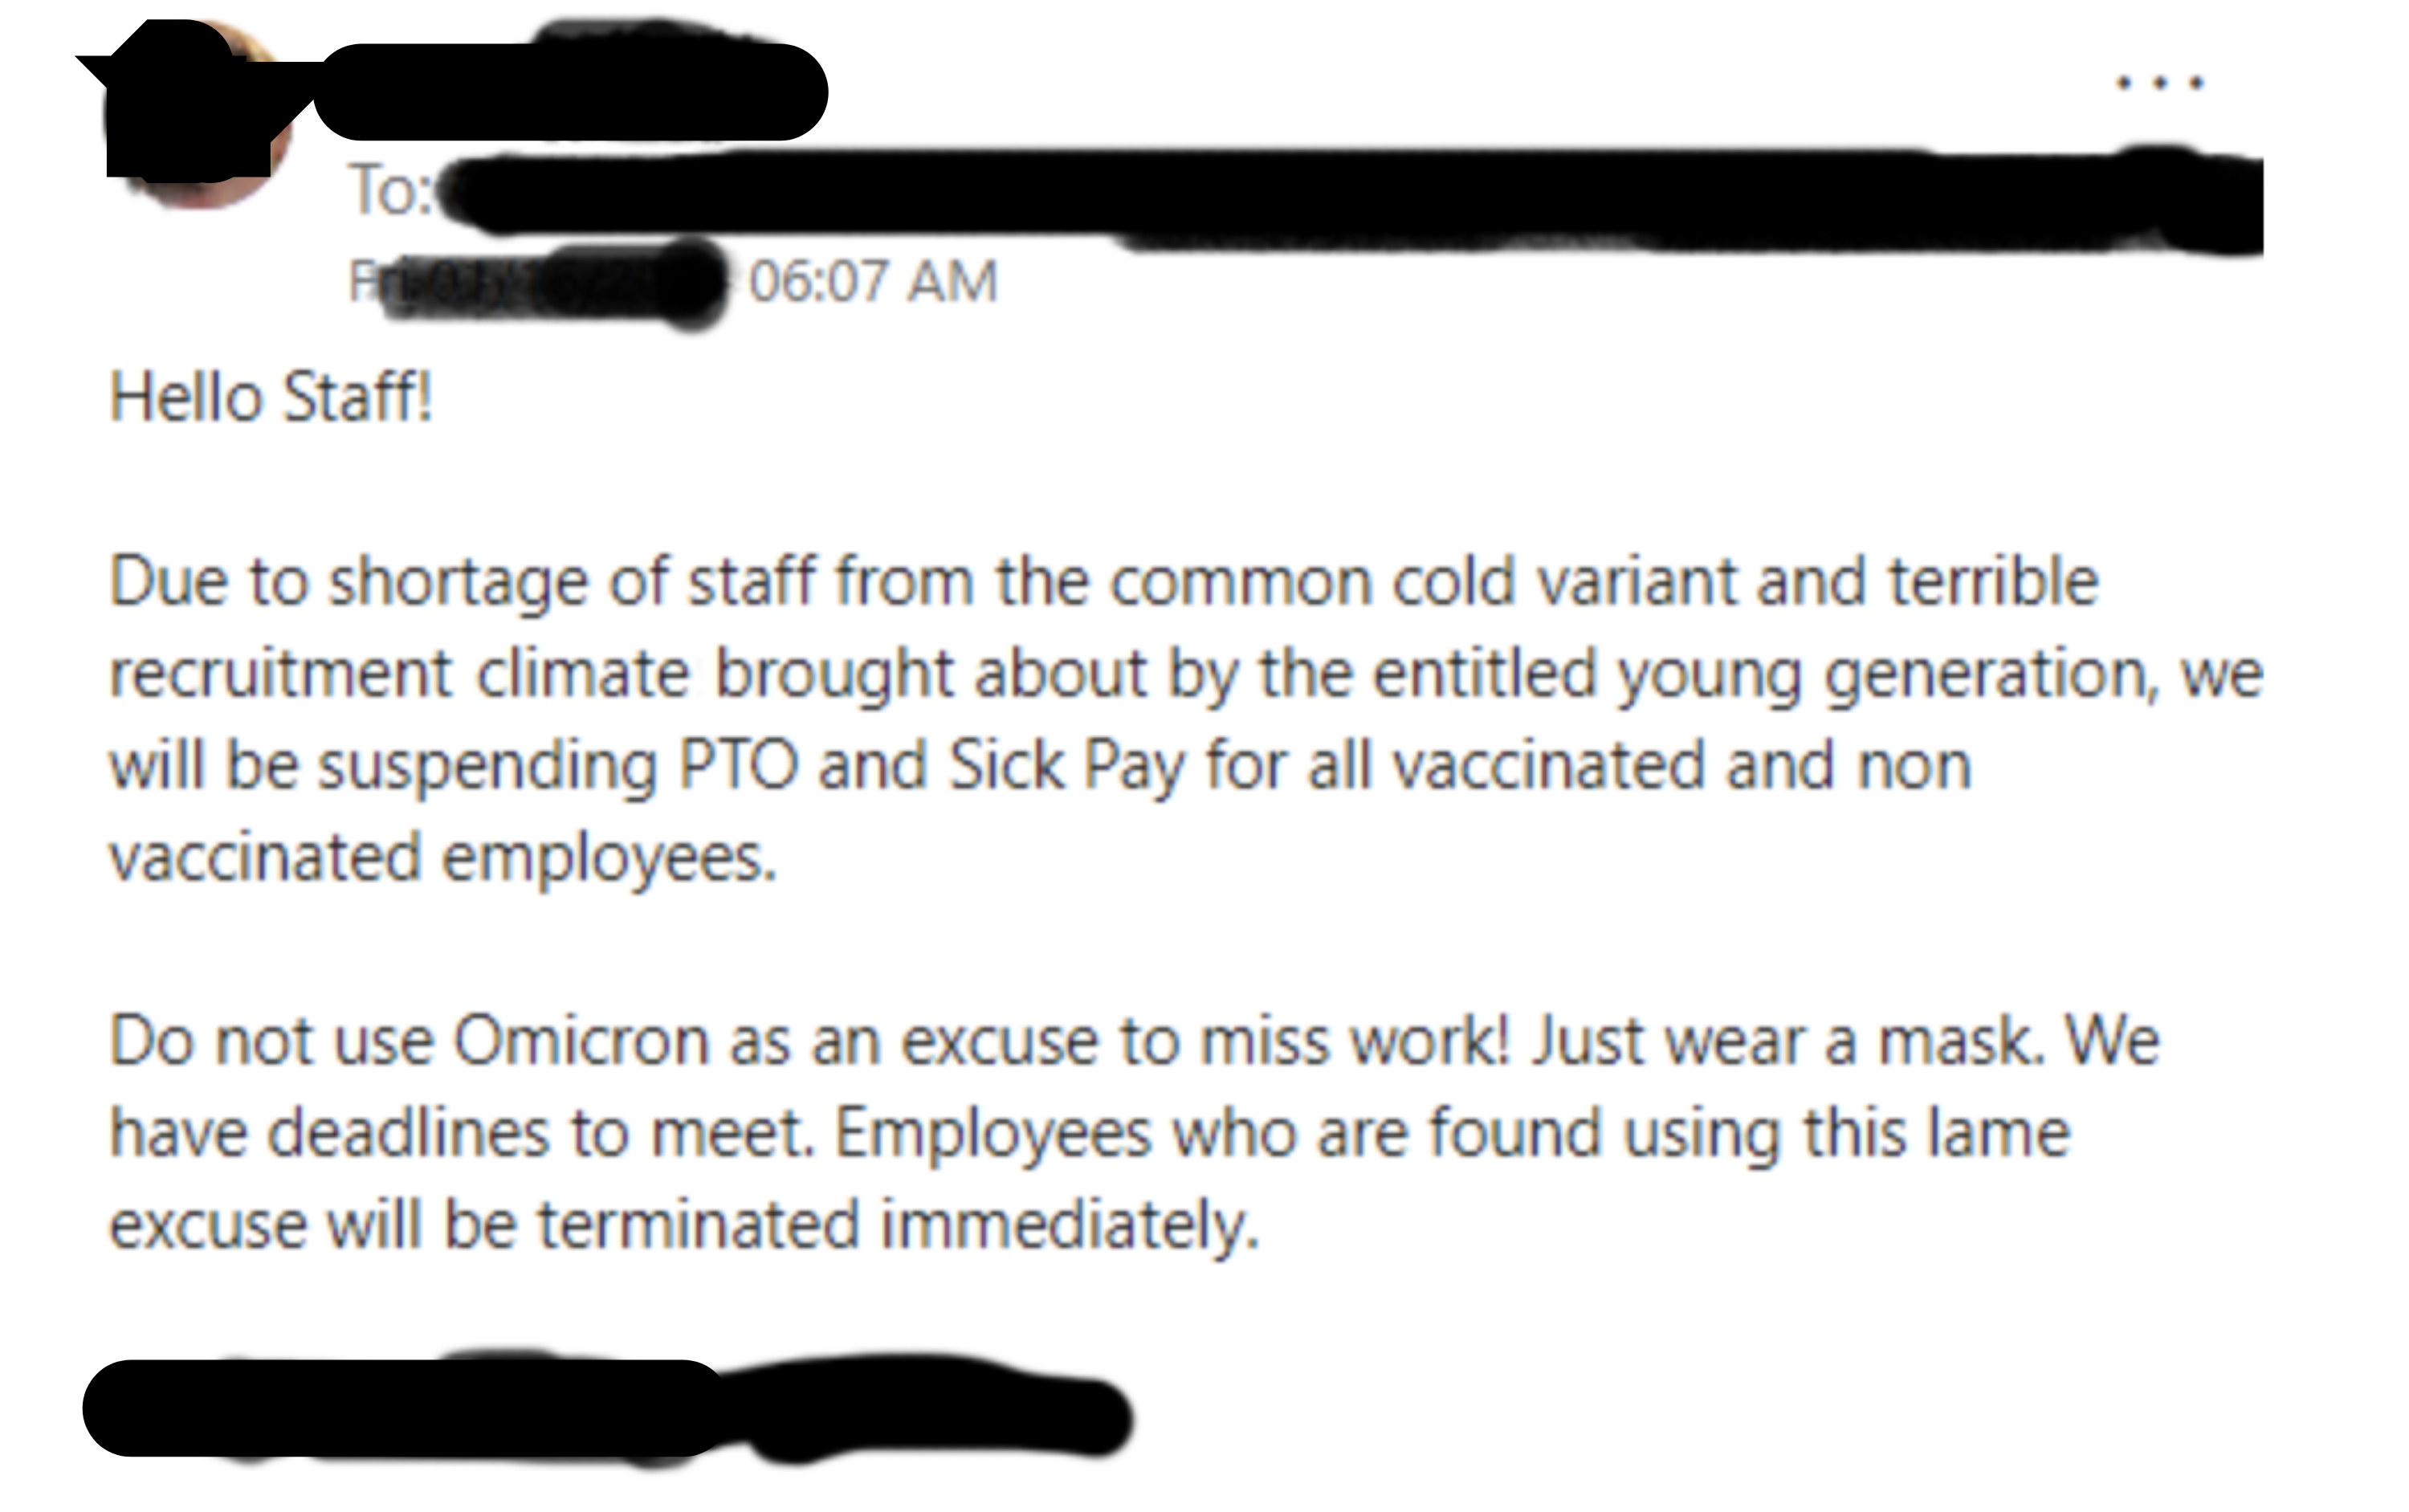 due to shortage of staff from the common cold variant and terrile recruitment climate brought by the entitled young generation, we will be suspending PTO and sick pay for all vaccinated and non vaccinated employees